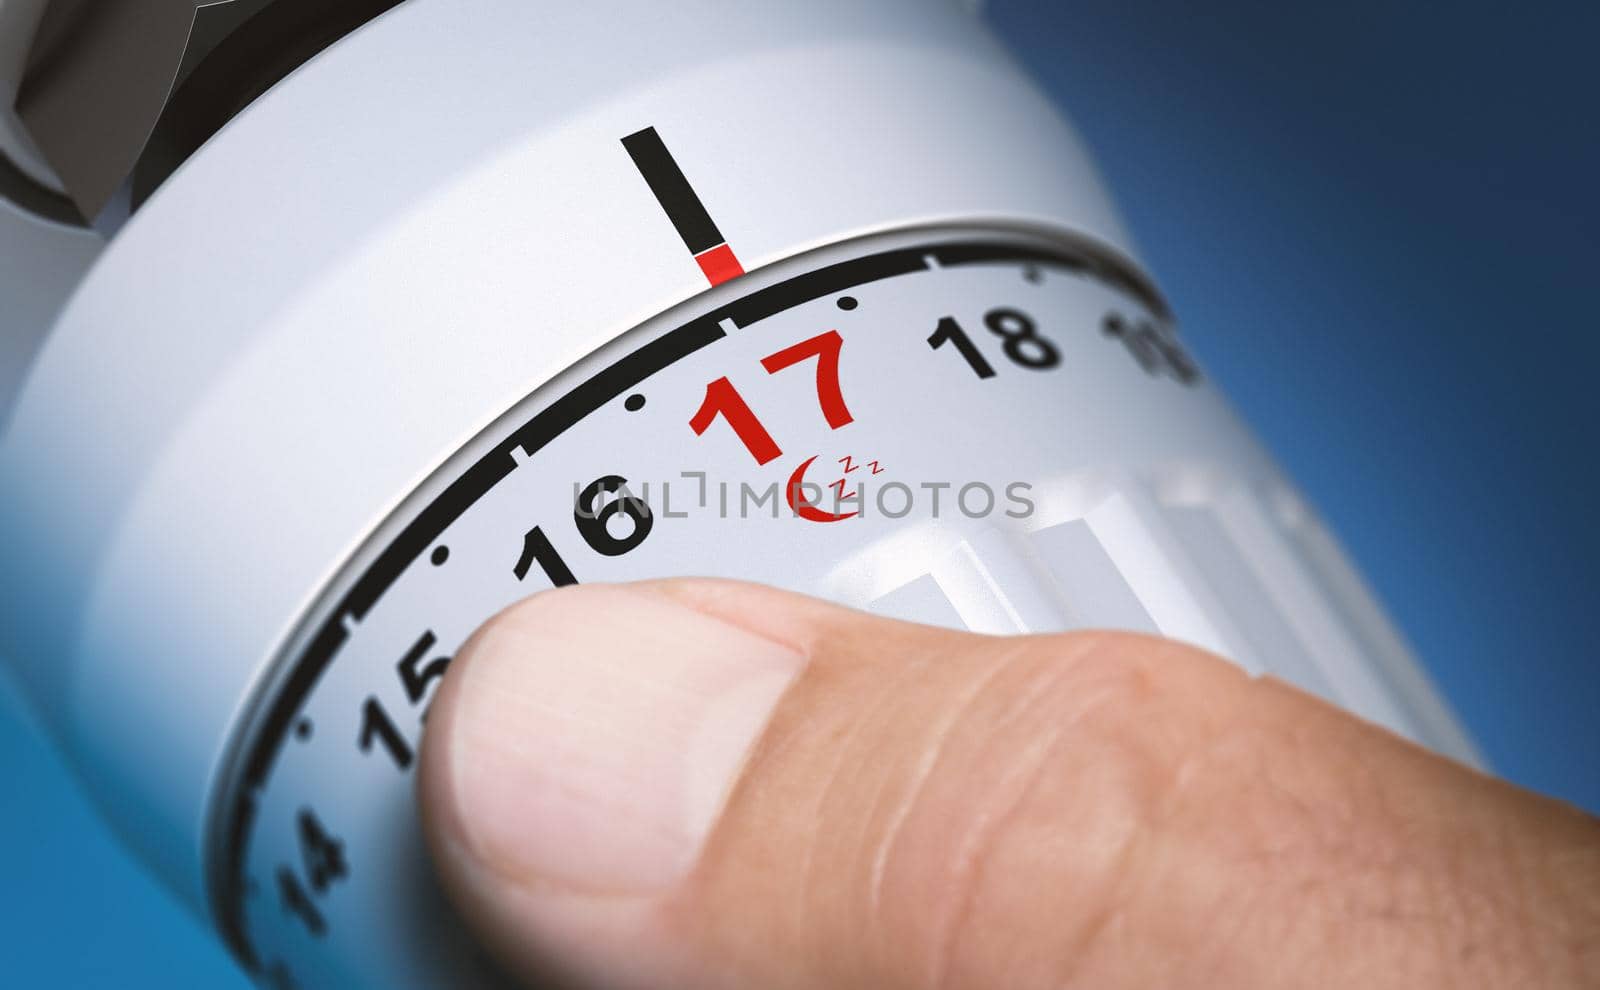 Man setting thermostat temperature to 17 degrees at night. Composite image between a 3d illustration and a photography.